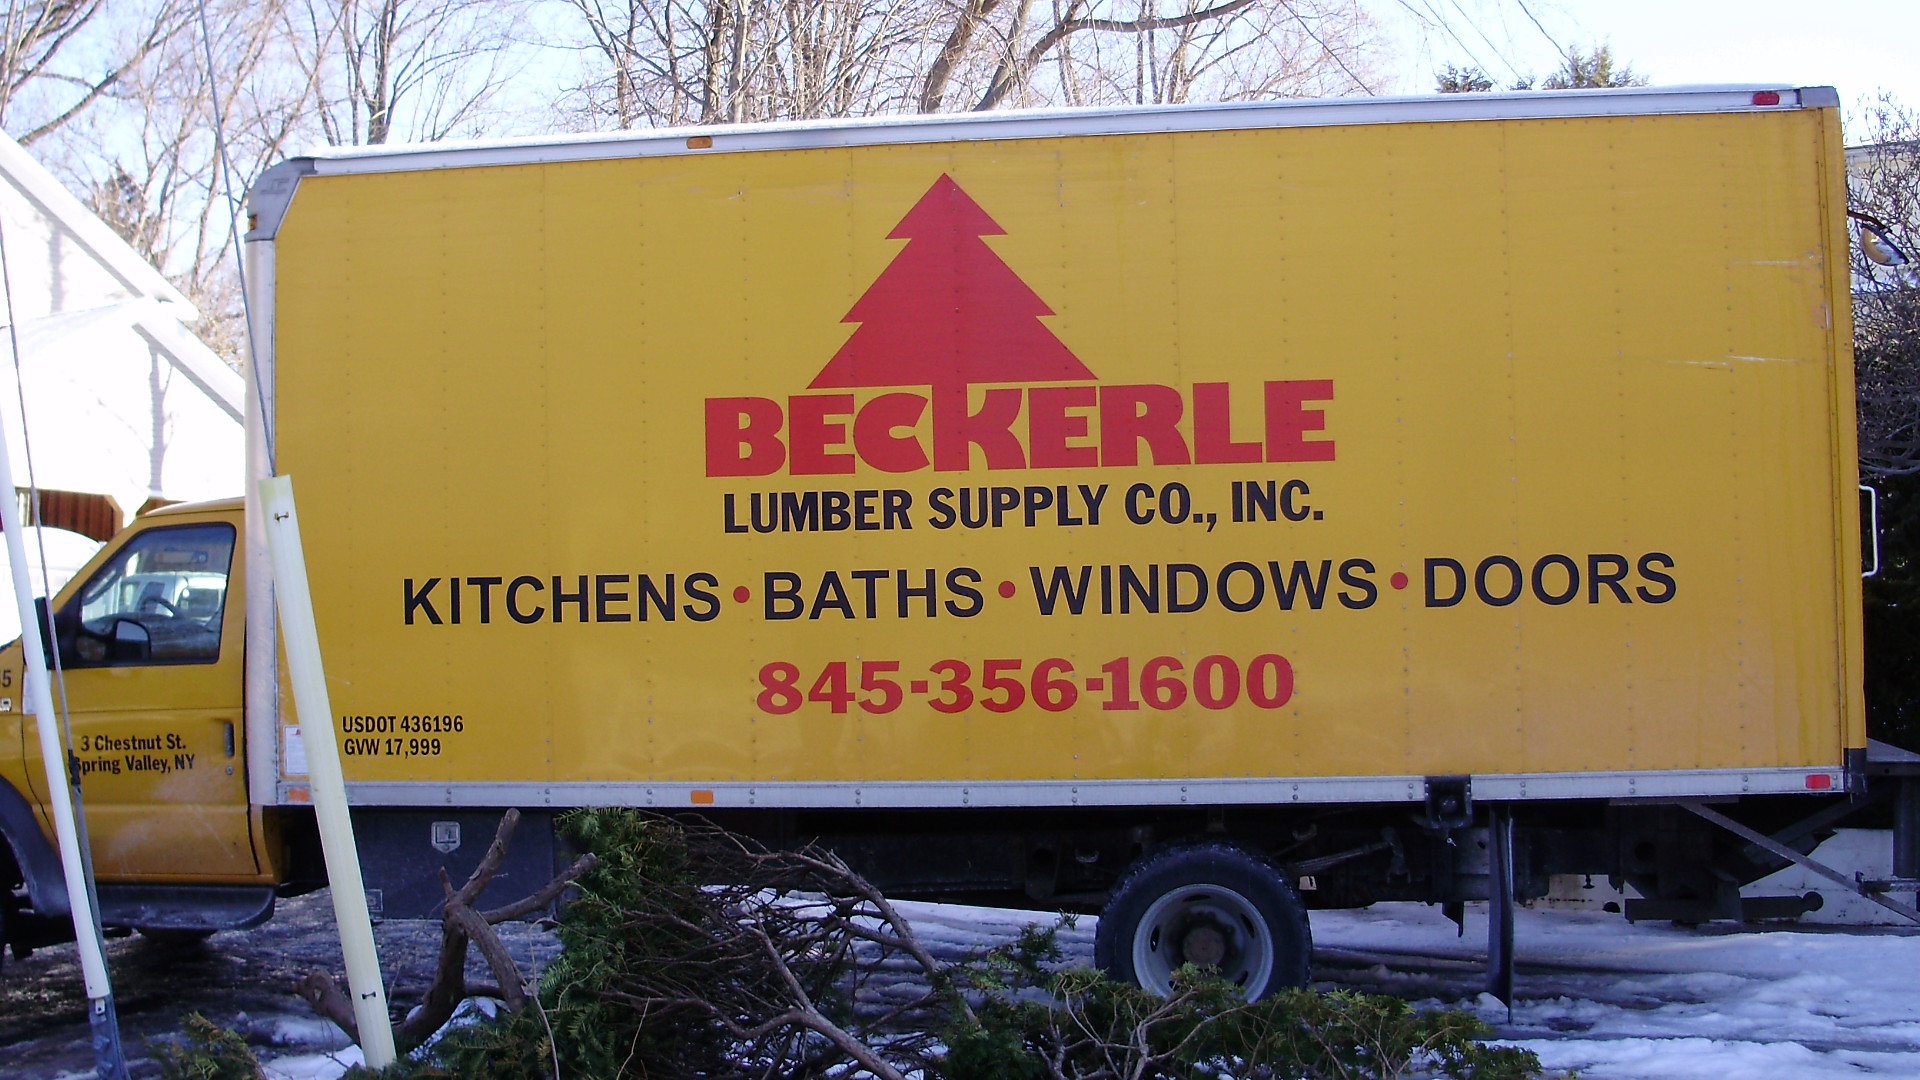 Most Complete Paint Line in County. Beckerle Lumber is your pintura Tienda!